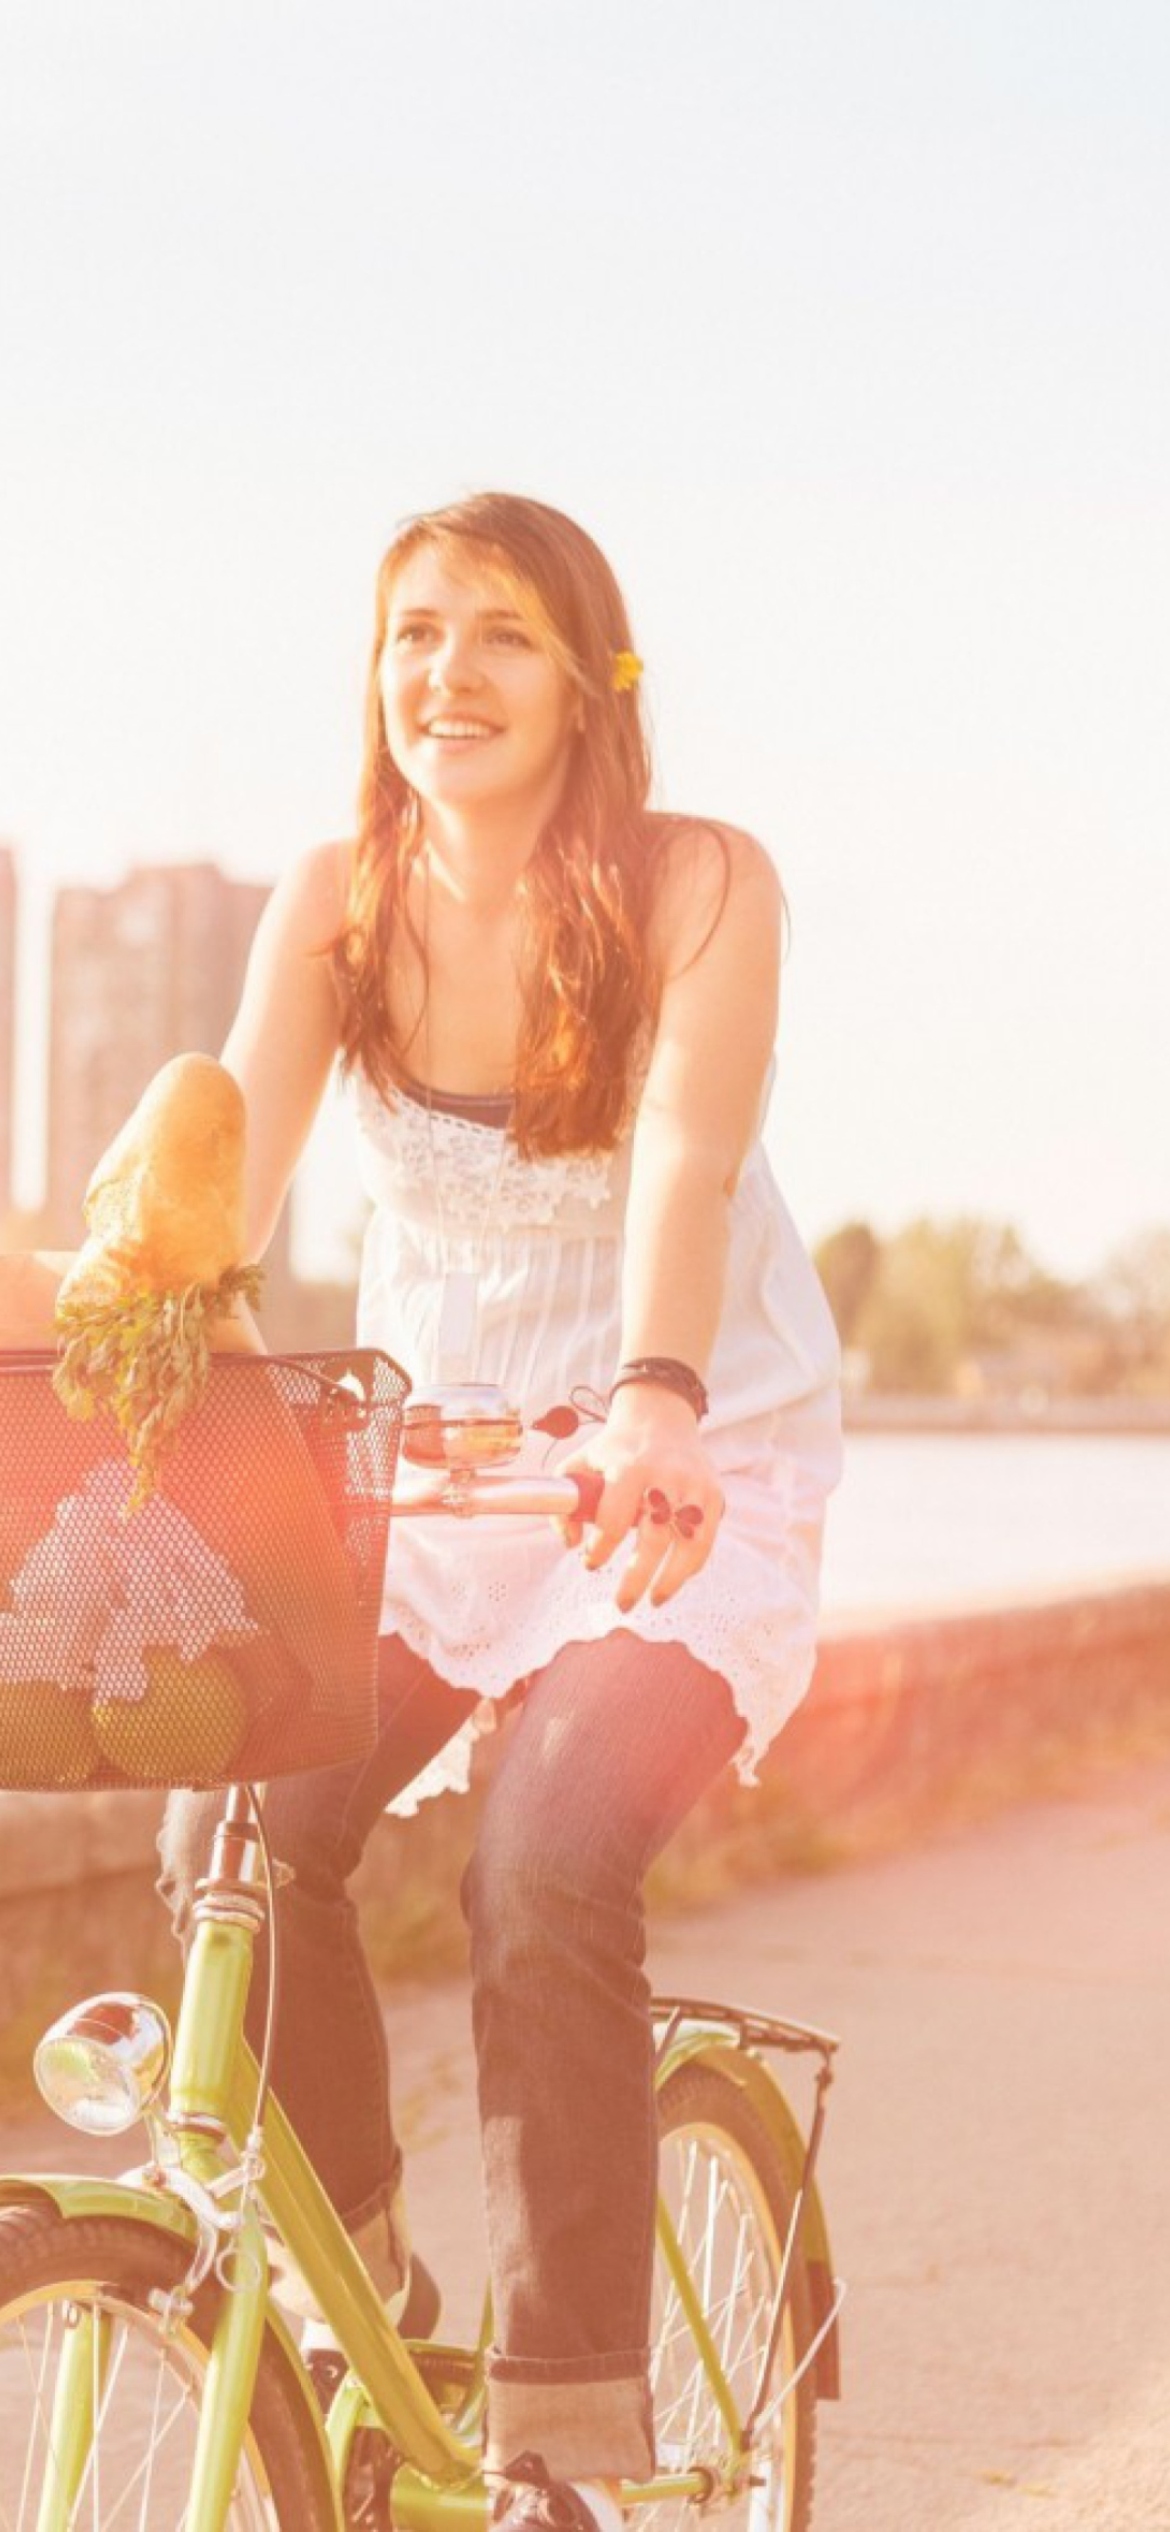 Girl On Bicycle In Sun Lights wallpaper 1170x2532